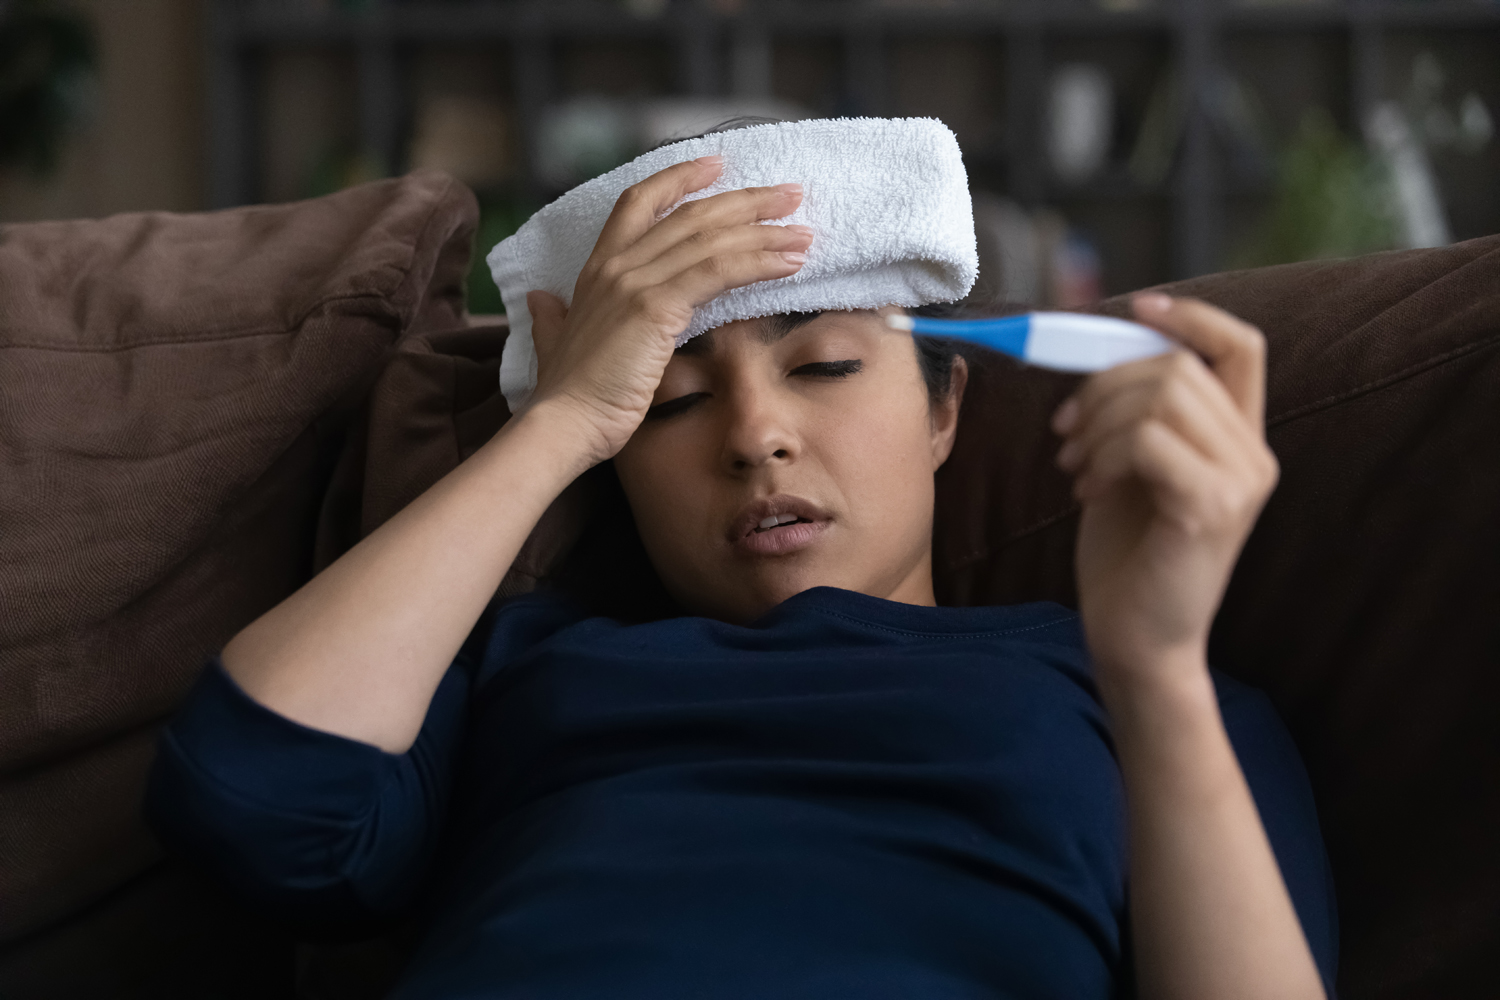 A sick woman slouches on the sofa. She holds a folded hand towel over her forehead while checking the temperature reading on her thermometer.